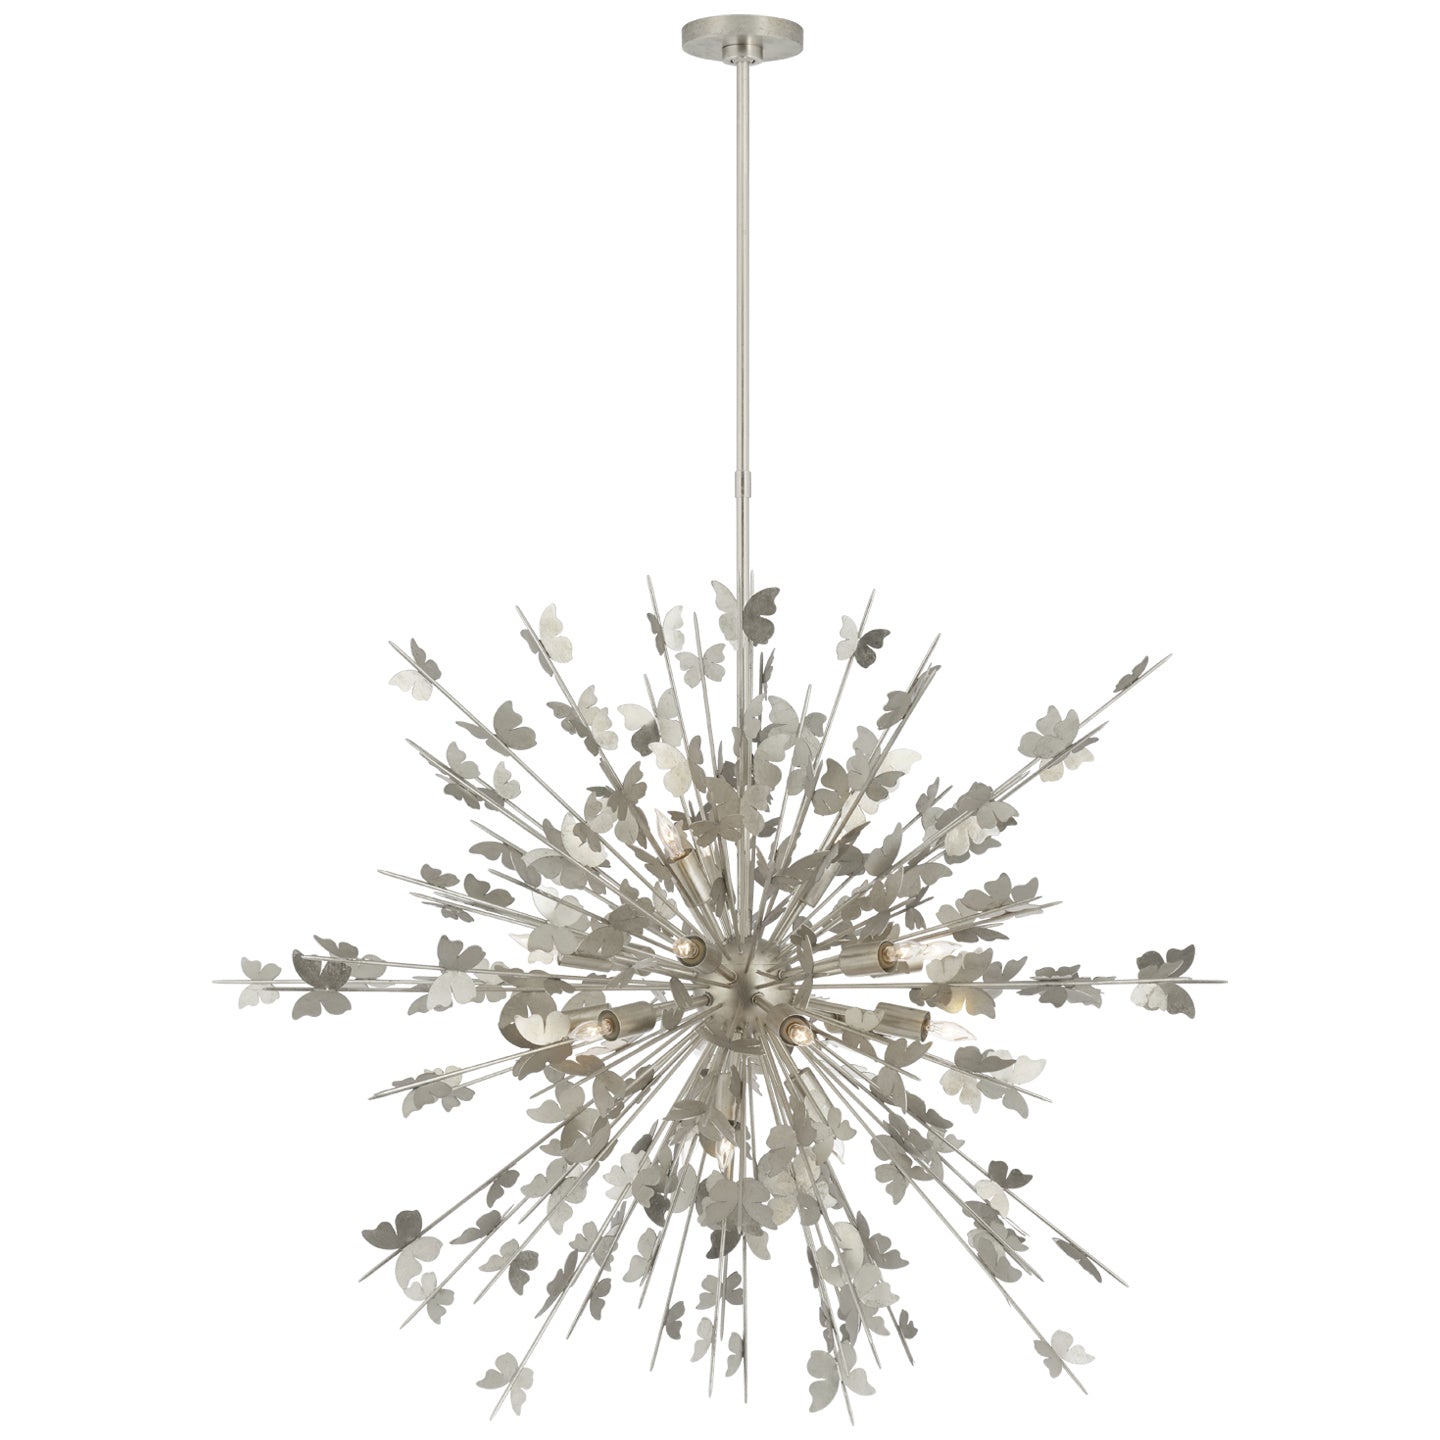 Load image into Gallery viewer, Visual Comfort Signature - JN 5502BSL - 18 Light Chandelier - Farfalle - Burnished Silver Leaf
